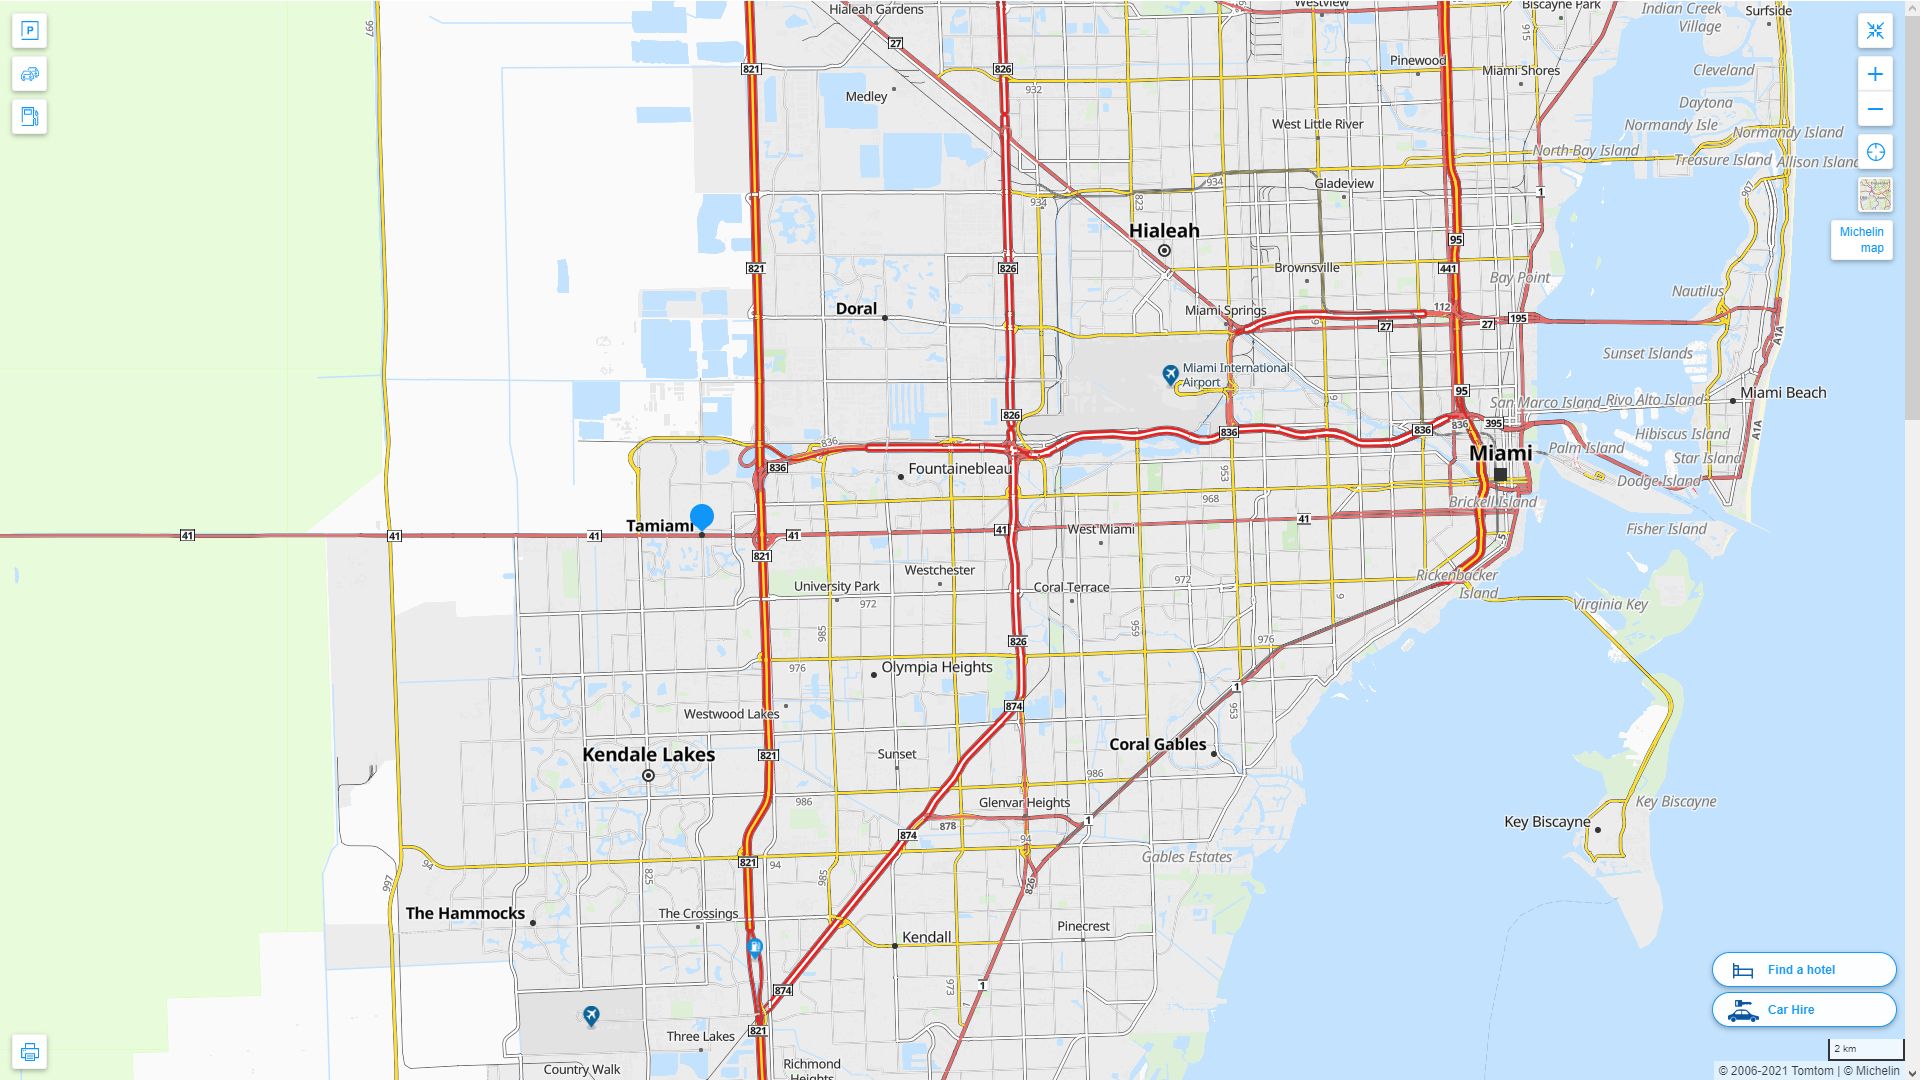 Tamiami Florida Highway and Road Map